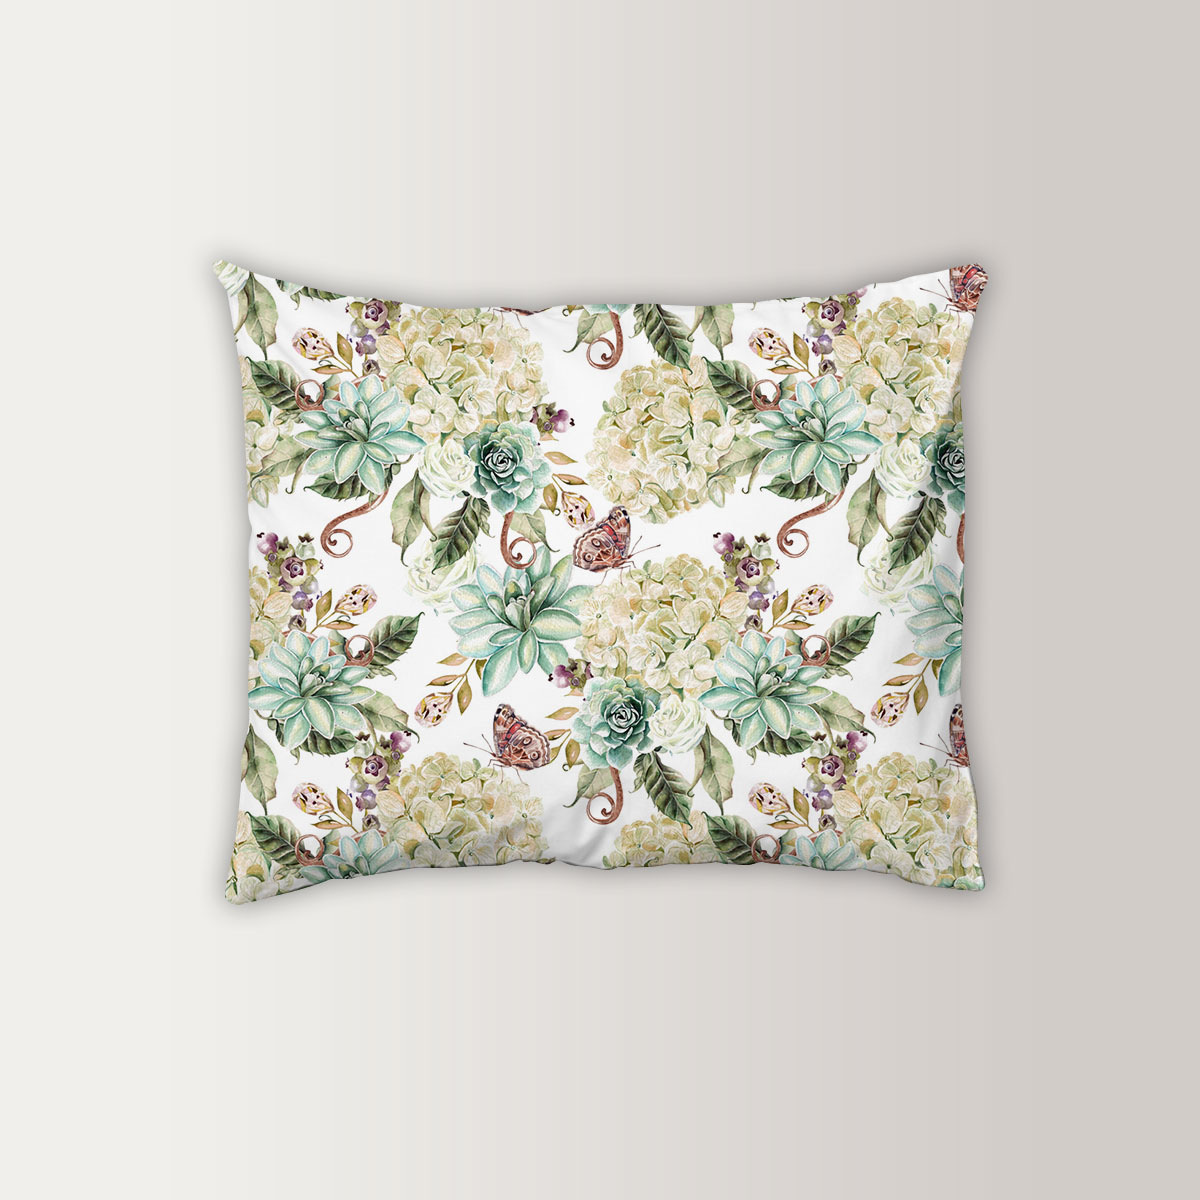 Bright Watercolor With Flowers Hydrangea, Rose And Succulents Pillow Case